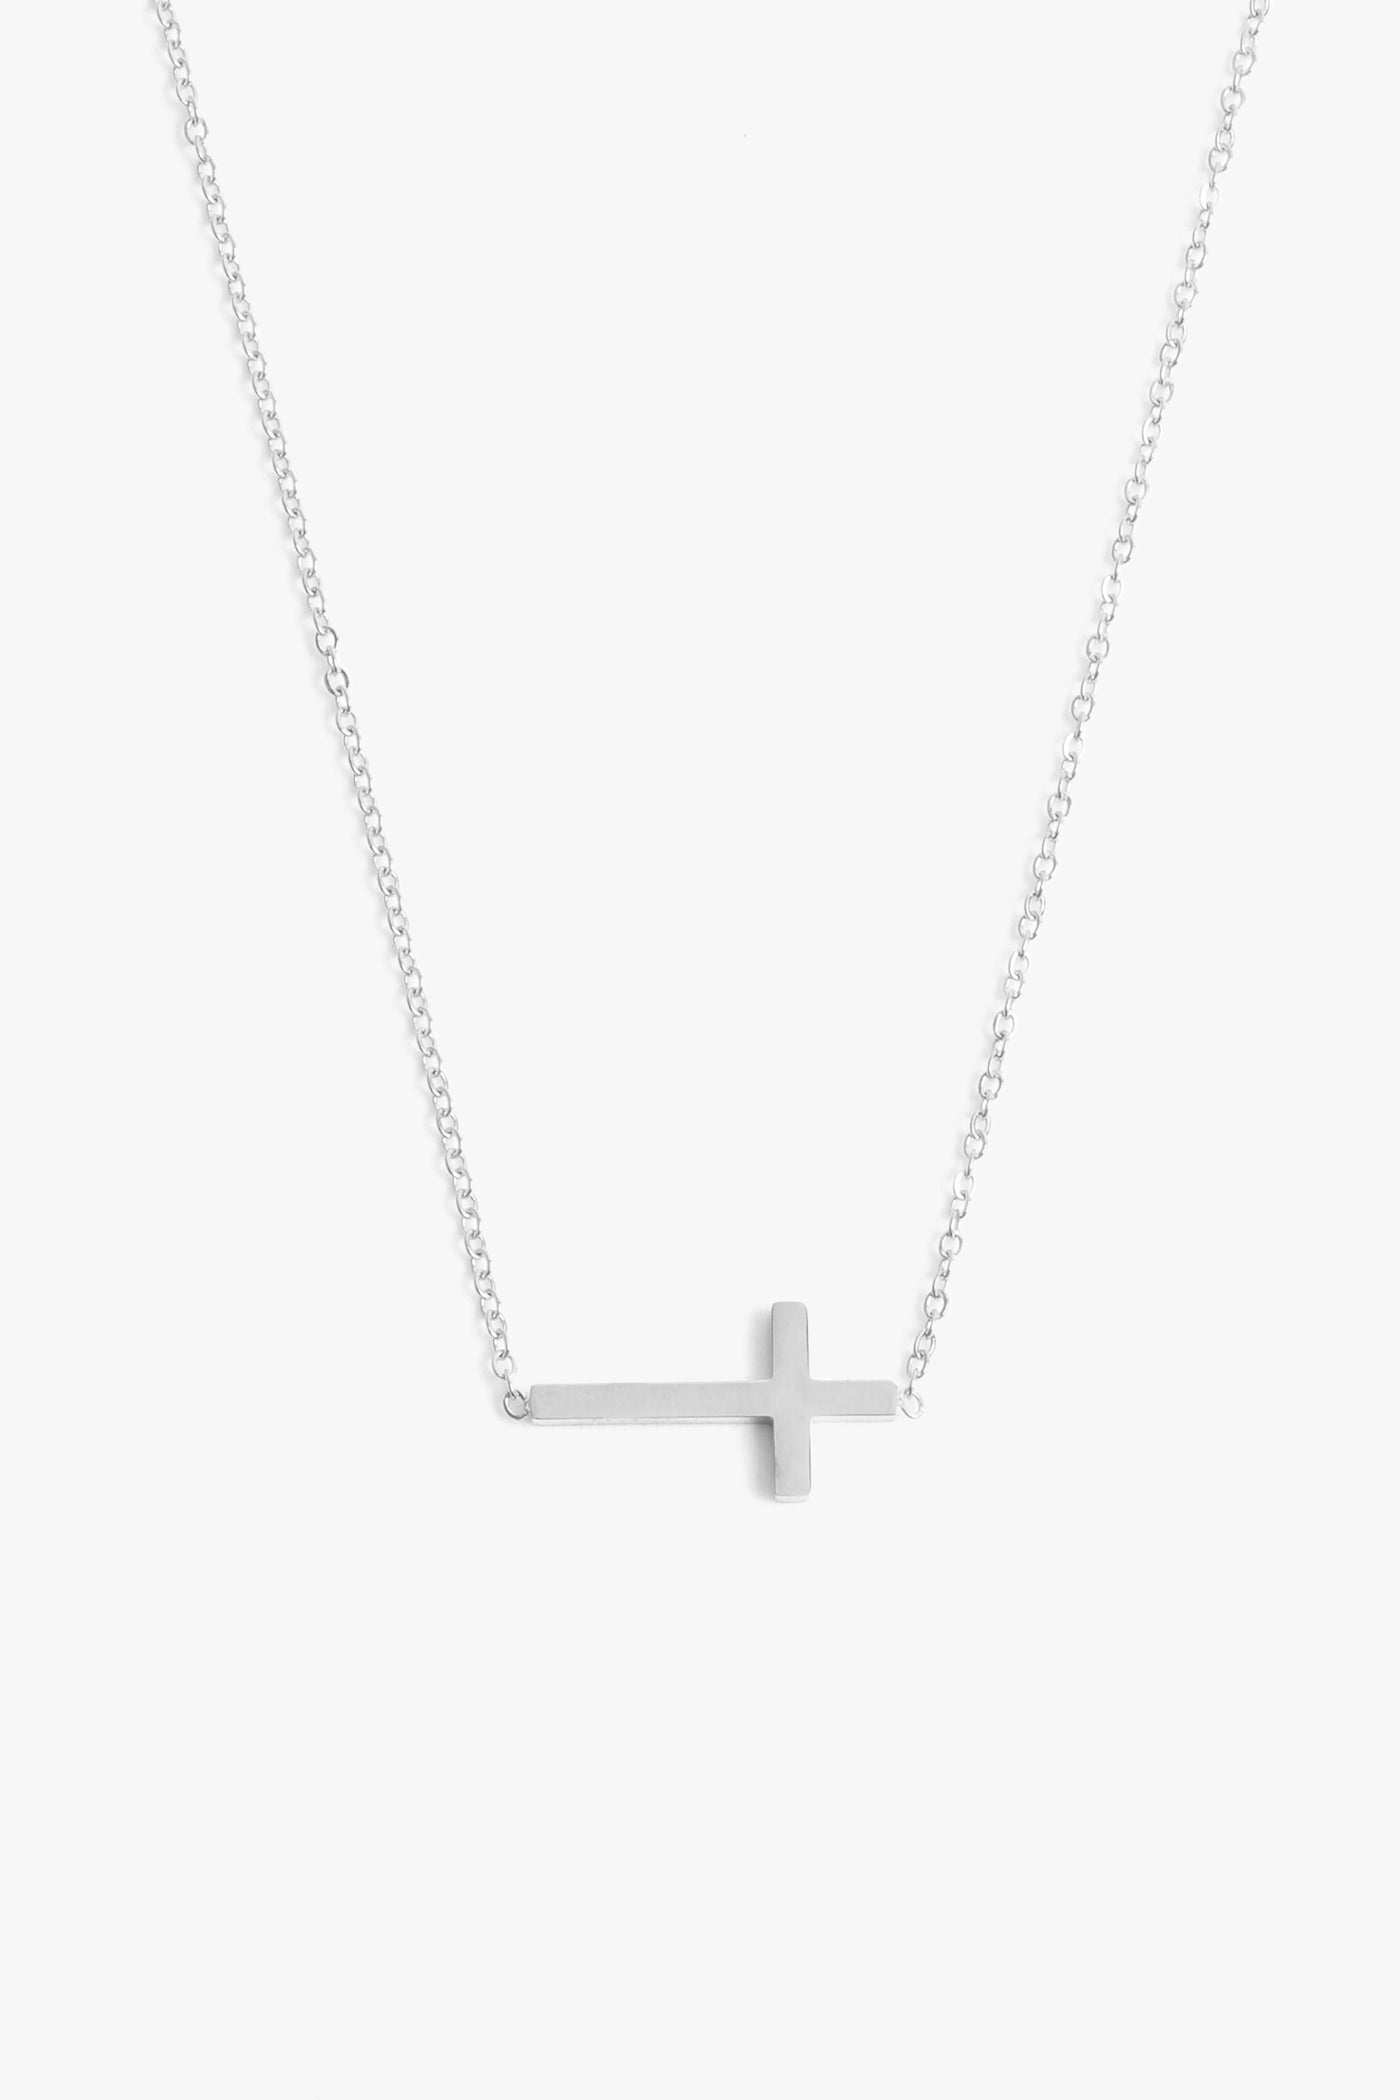 Marrin Costello Jewelry Barry Necklace sideways cross necklace with lobster clasp closure and extender. Waterproof, sustainable, hypoallergenic. Polished stainless steel.